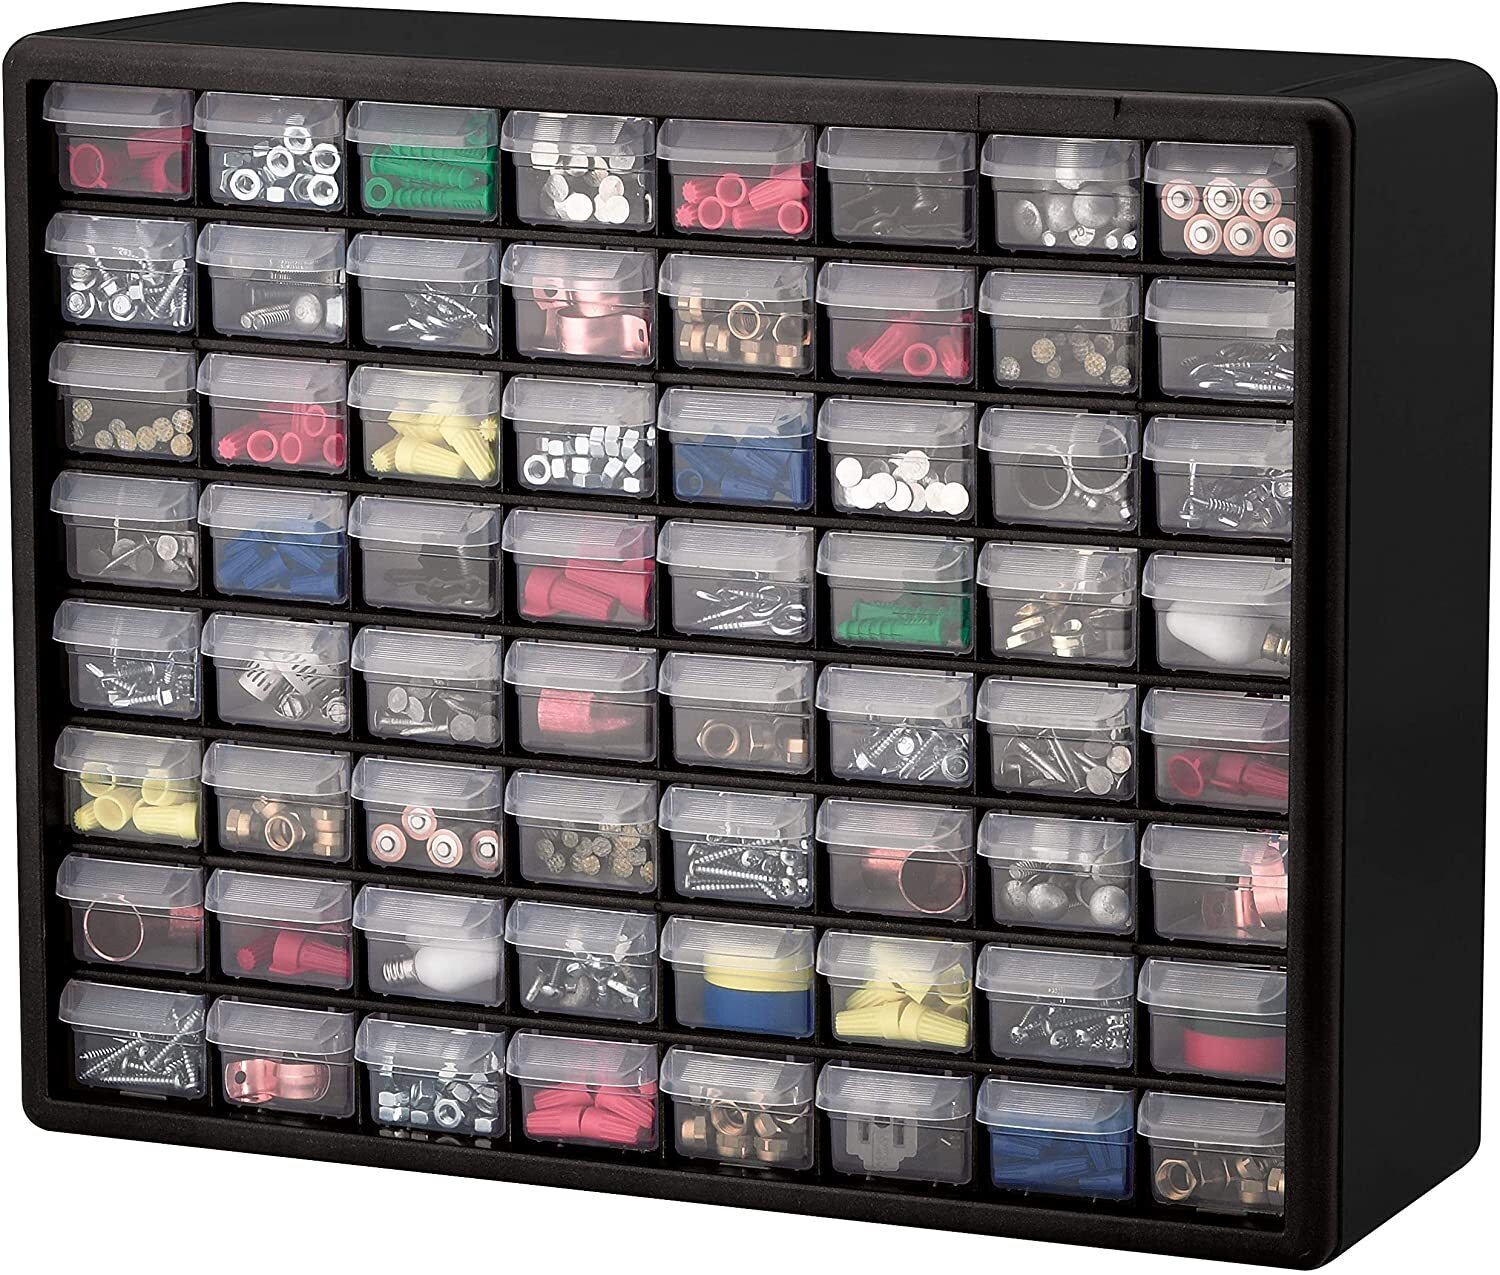 Multi Drawer Plastic Wall Mounted Storage Cabinet 